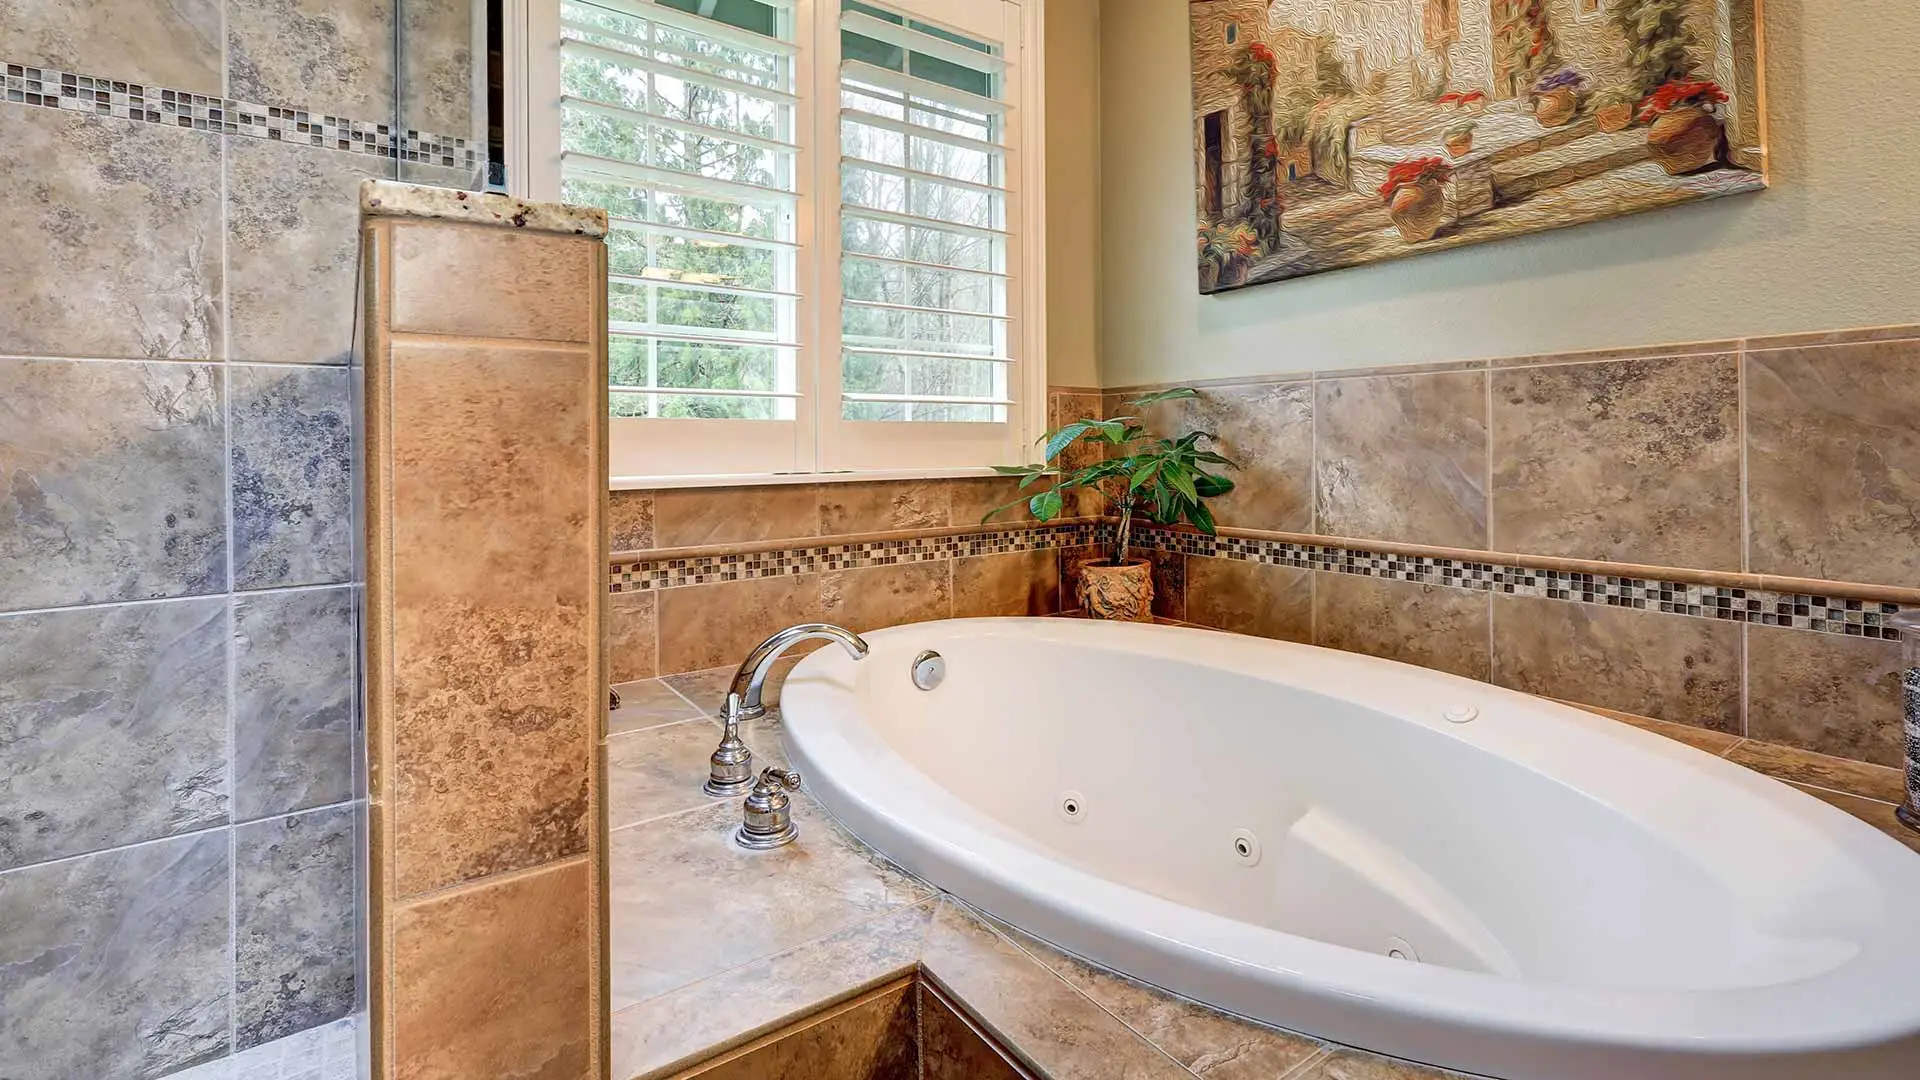 6 Common Mistakes When Remodeling the Bathroom